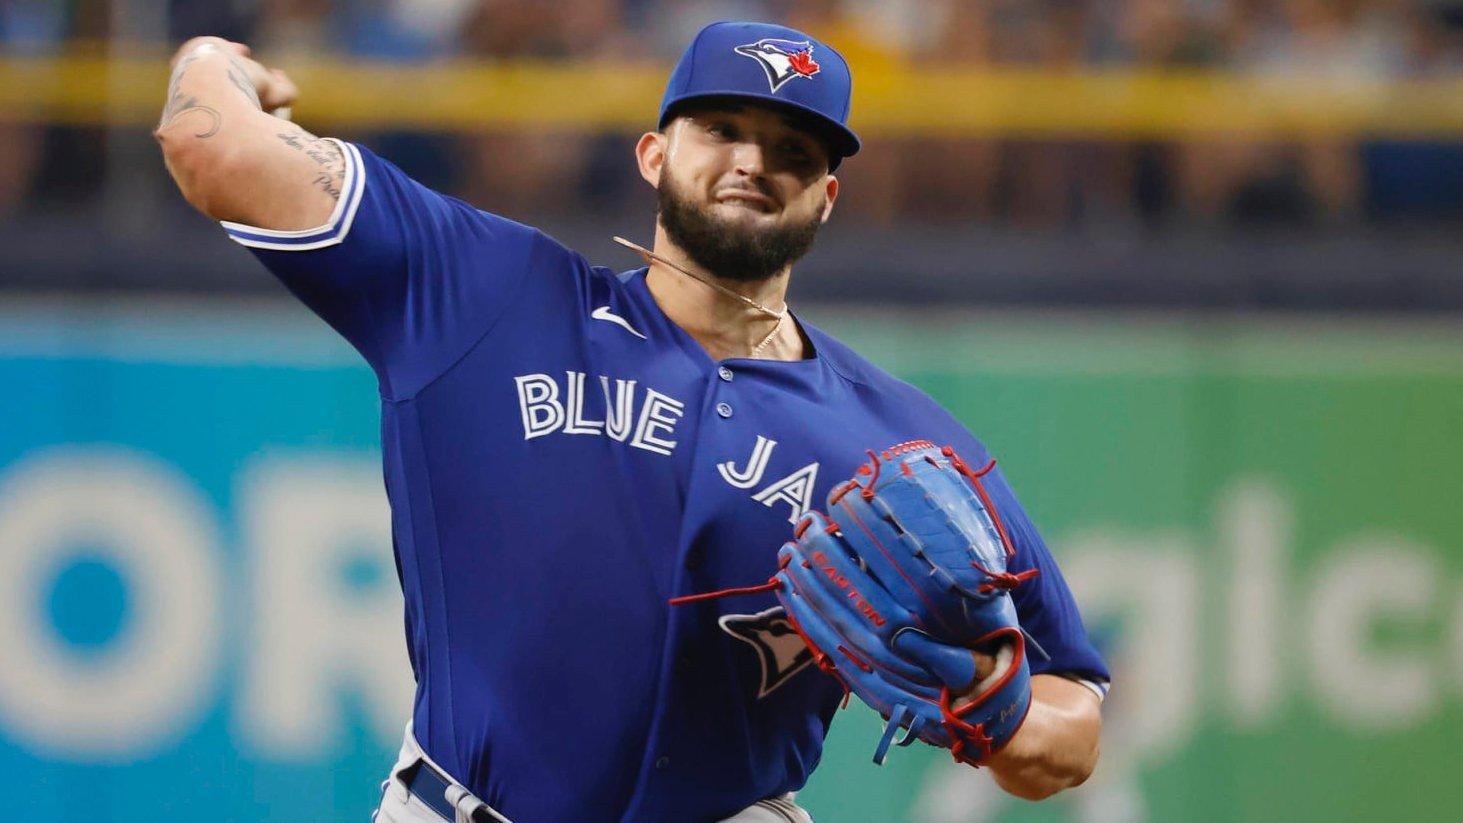 Blue Jays vs. Twins Betting (August 4): Back Toronto and the Under Tonight